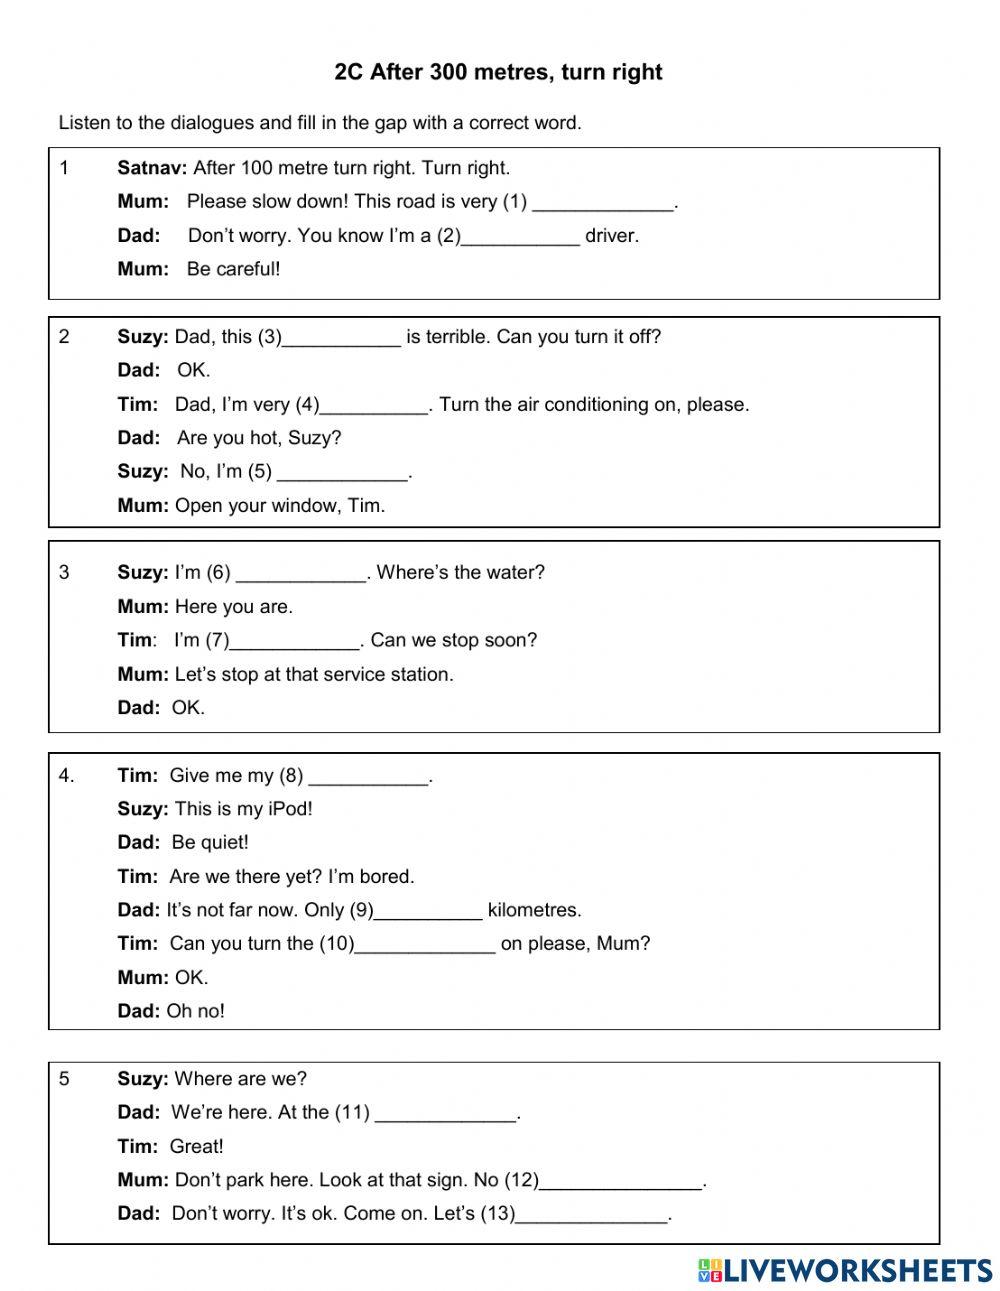 GEP1 Listening Page 17 Part1